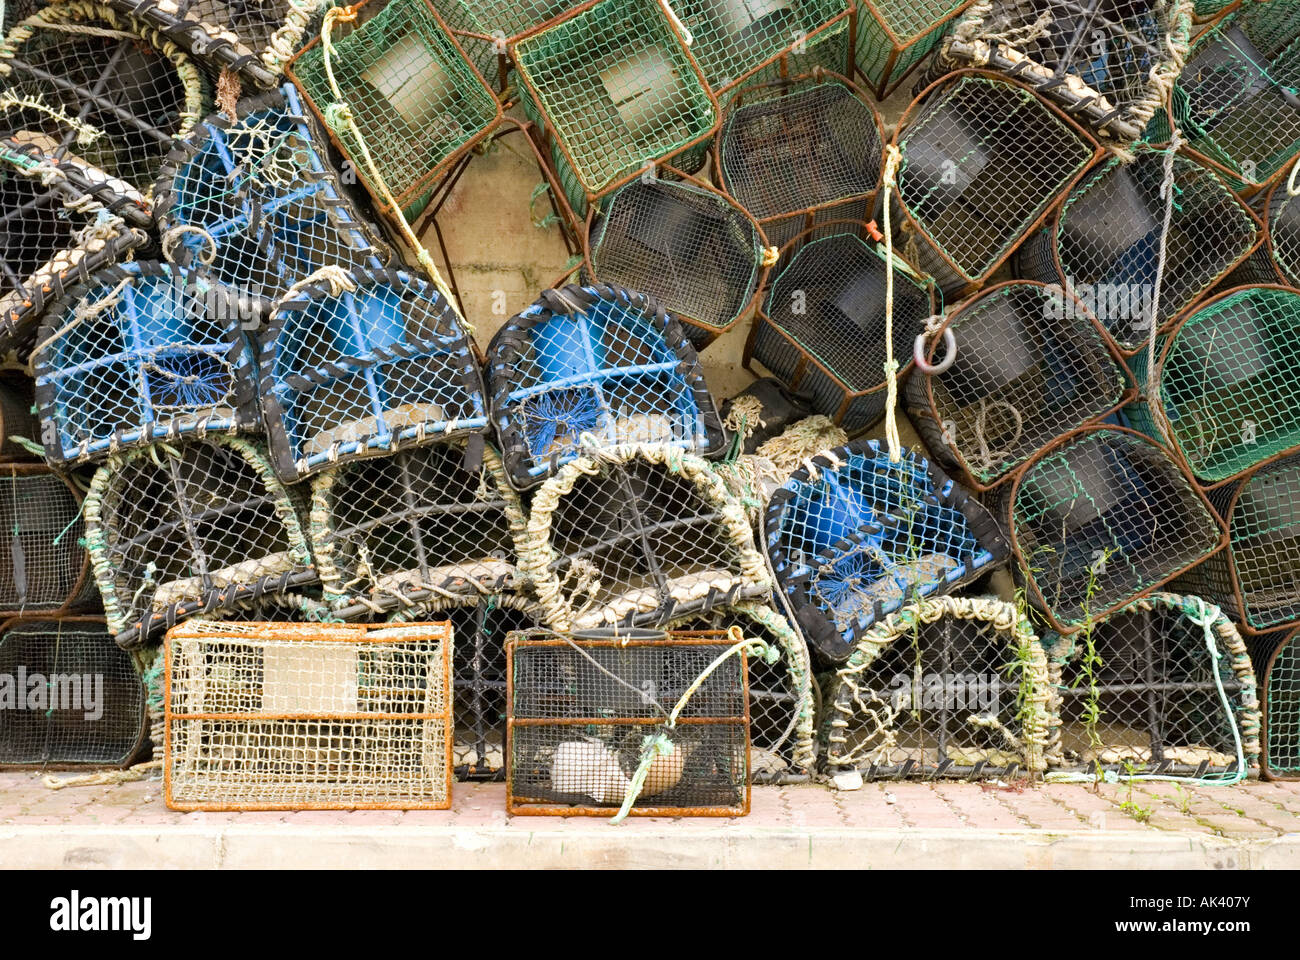 Crayfish or lobster pots are stacked against a wall in Getaria's harbour on the Basque Coast of Spain. Stock Photo